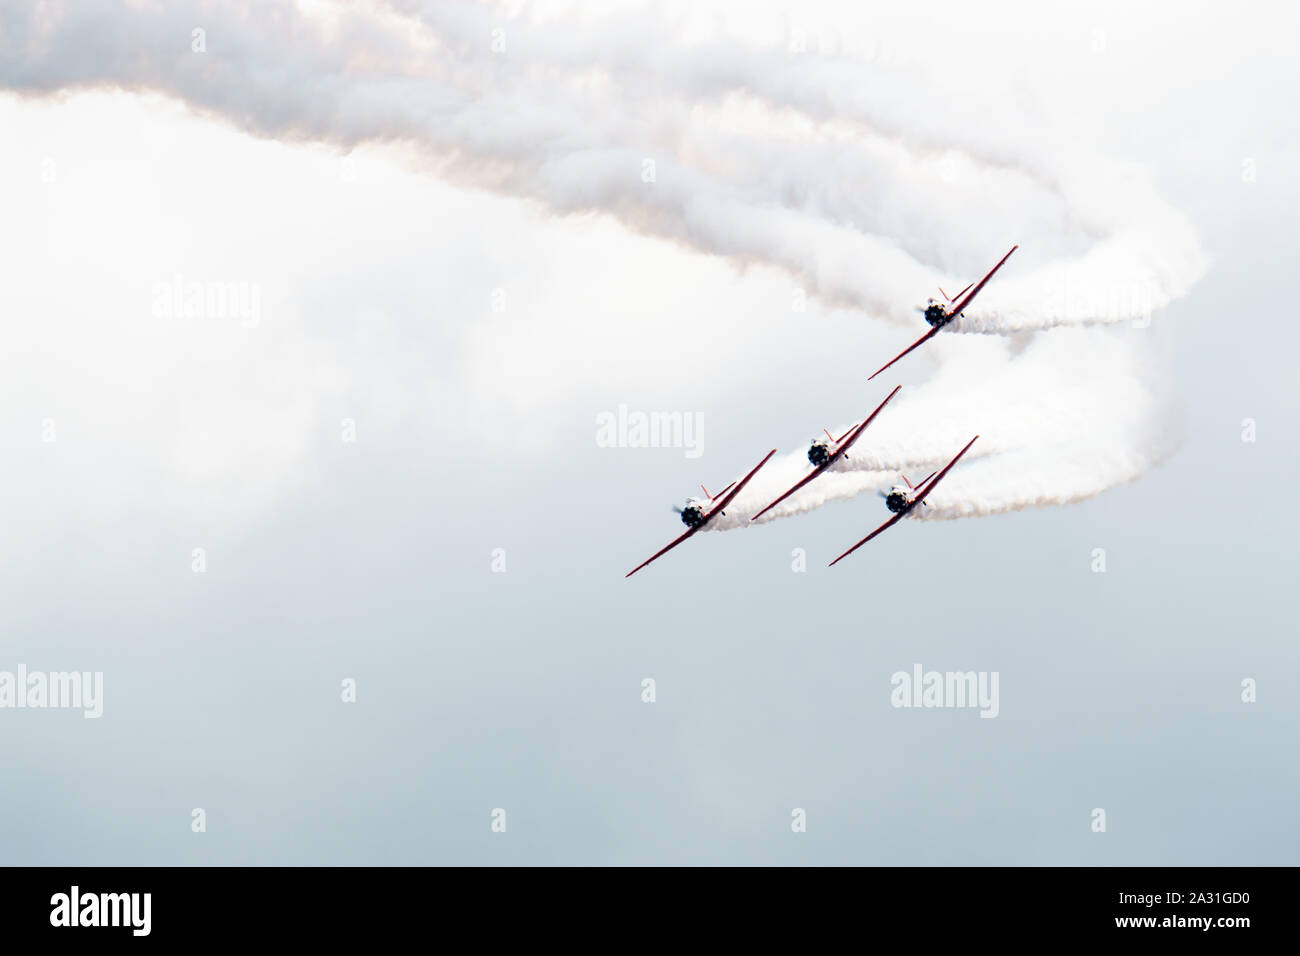 Planes performing acrobatic flight at air show. Stock Photo